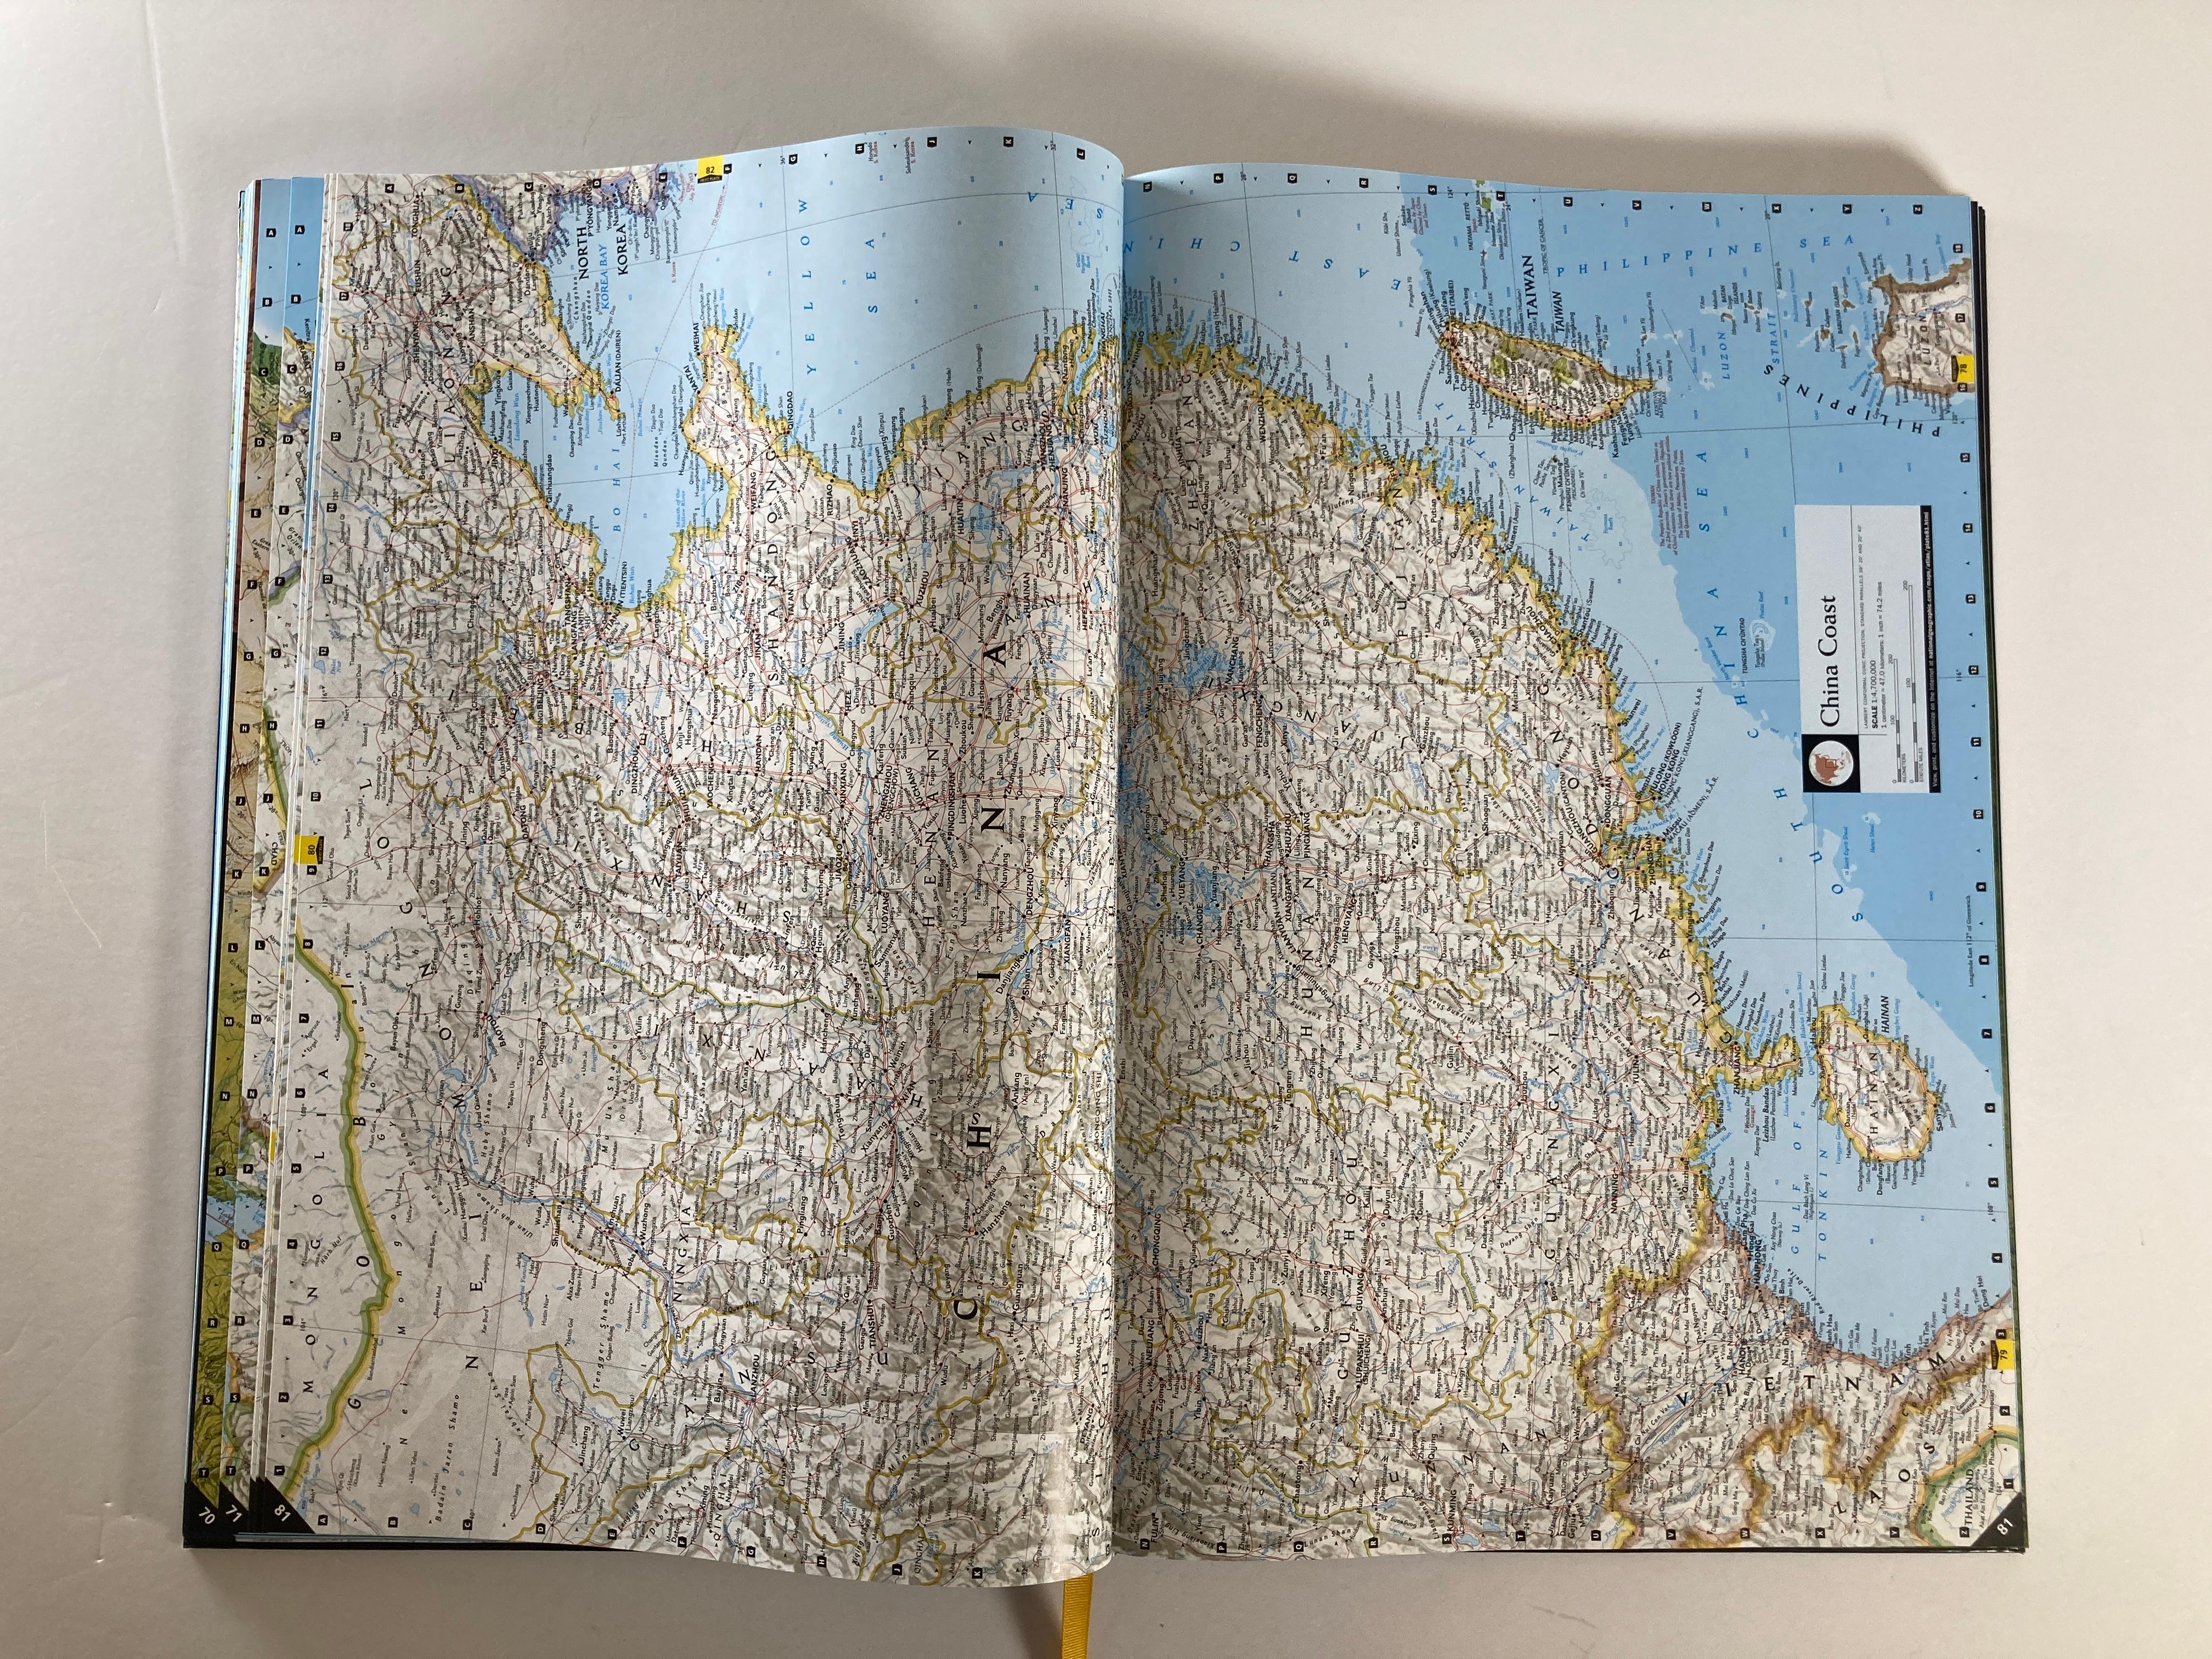 Contemporary National Geographic Atlas of the World, Eighth Edition Hardcover Book For Sale